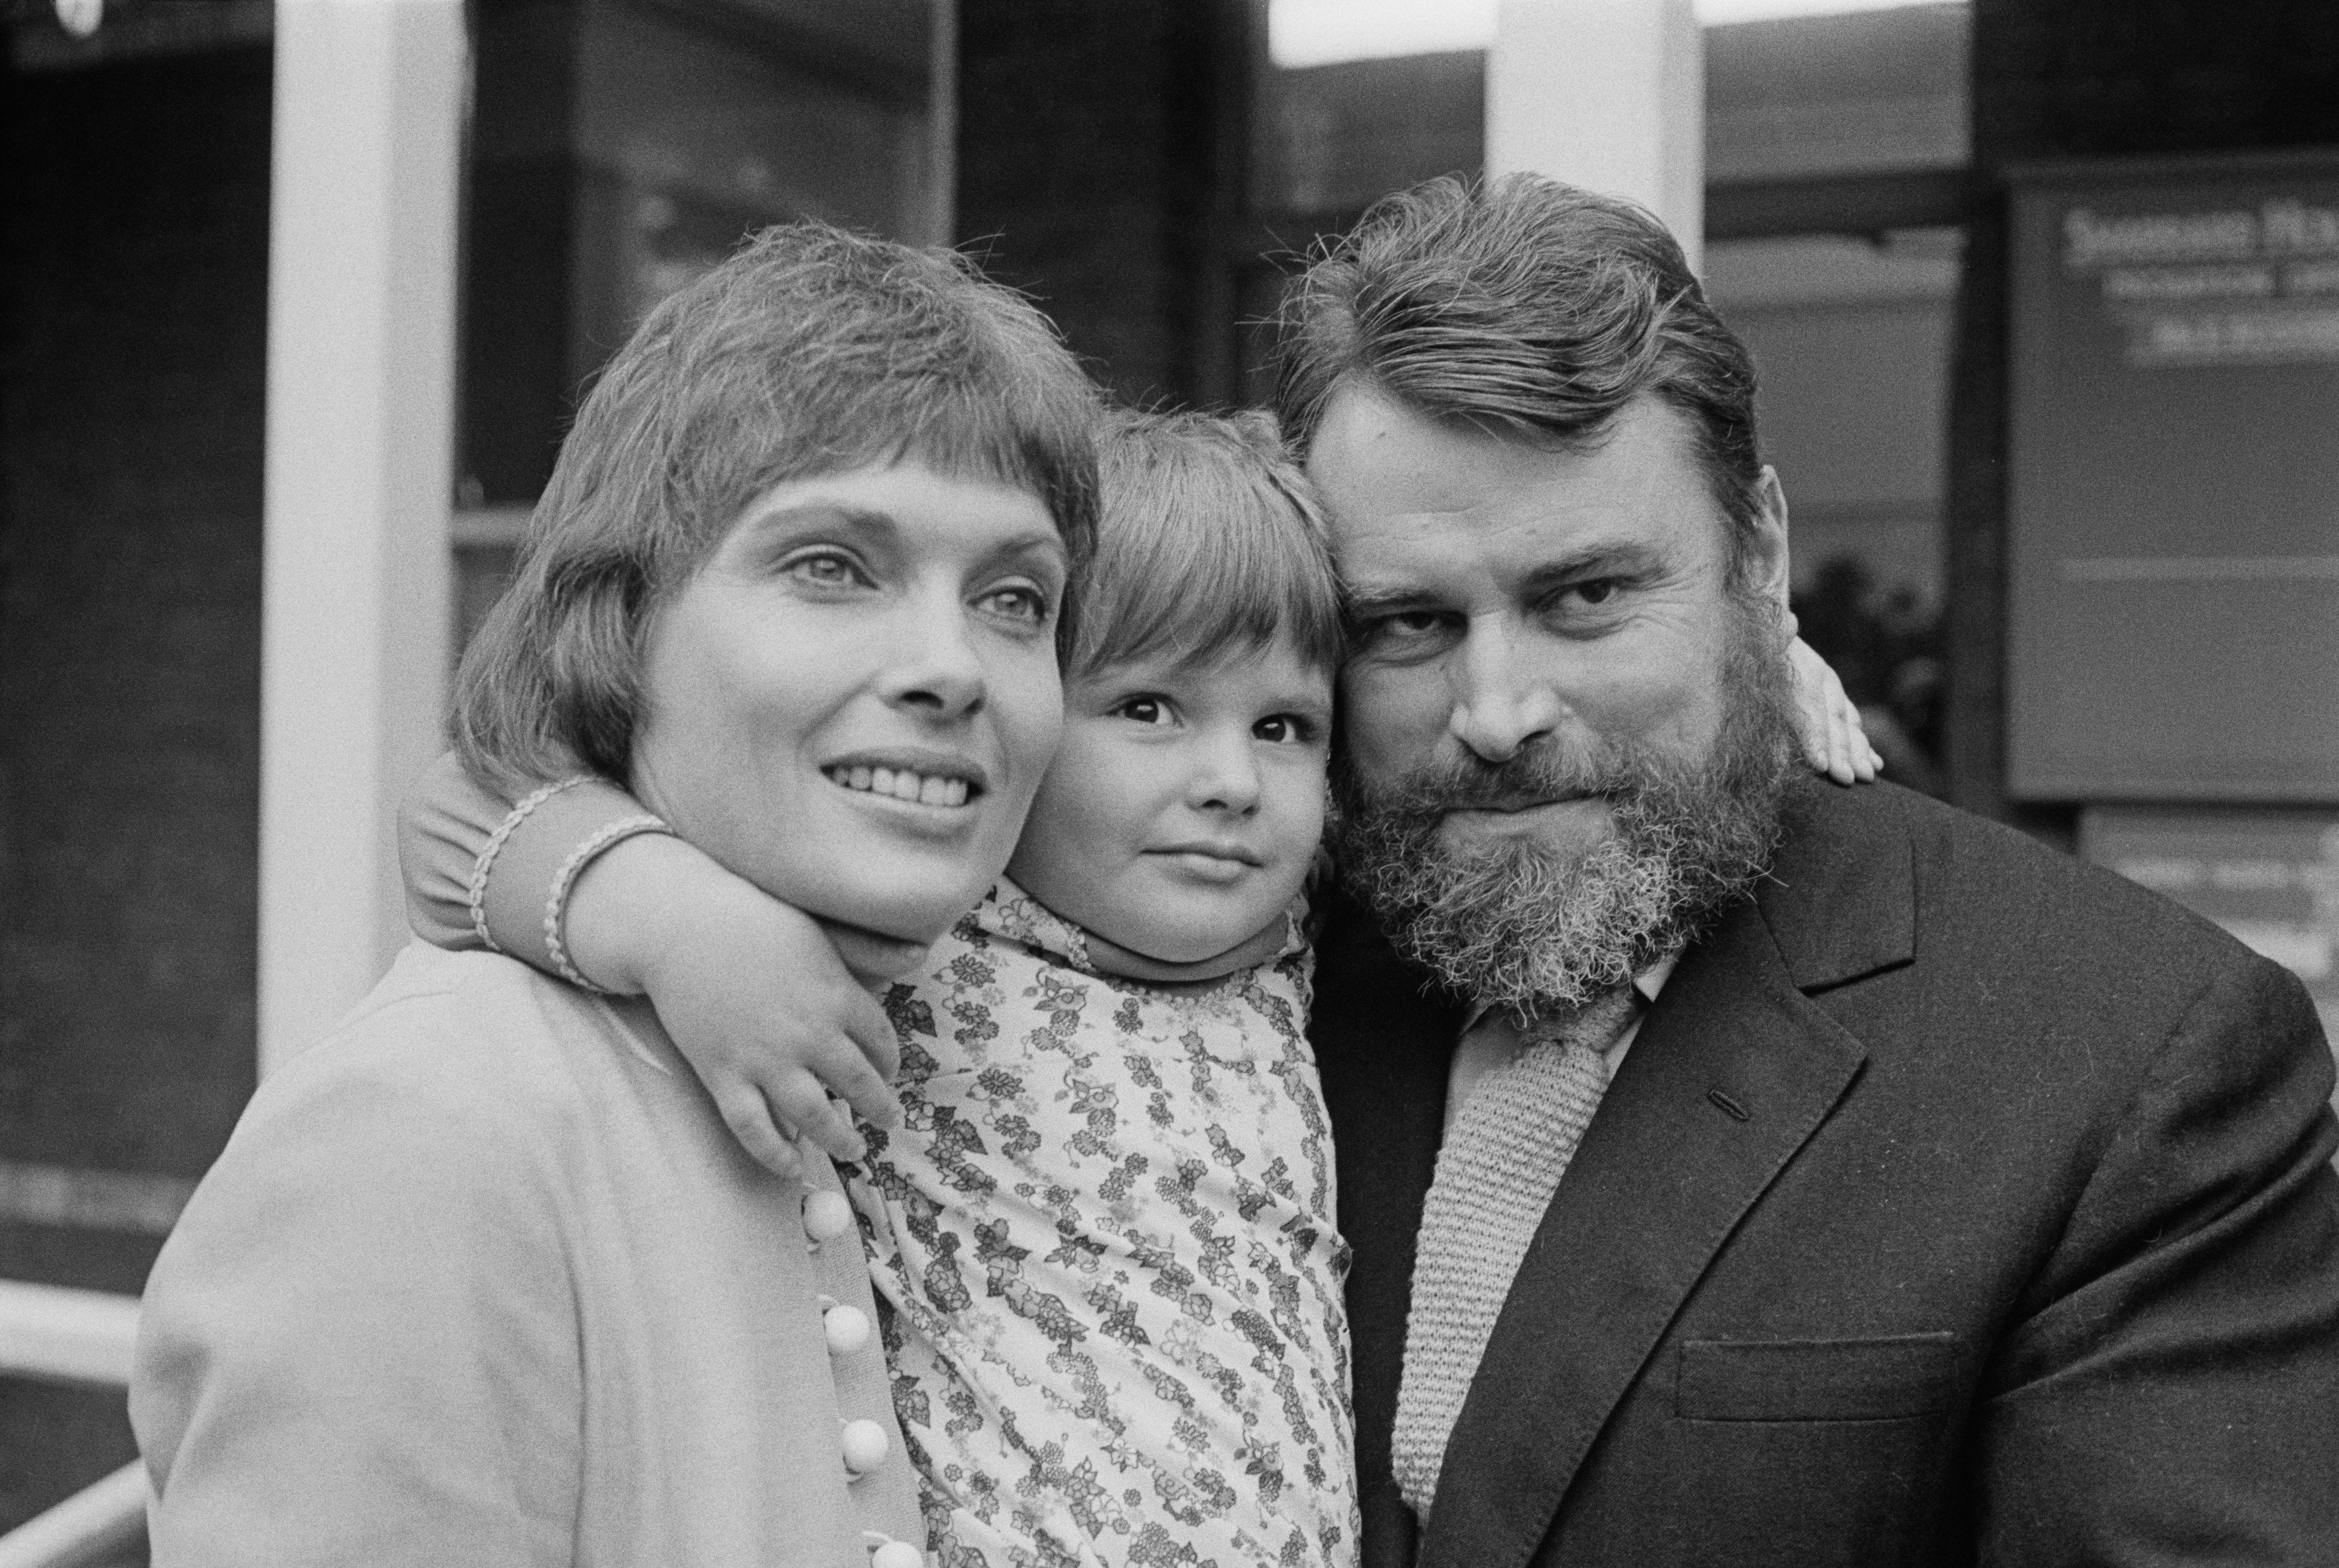 Brian Blessed and Hildegarde Neil and their daughter Rosalind Blessed, 1978